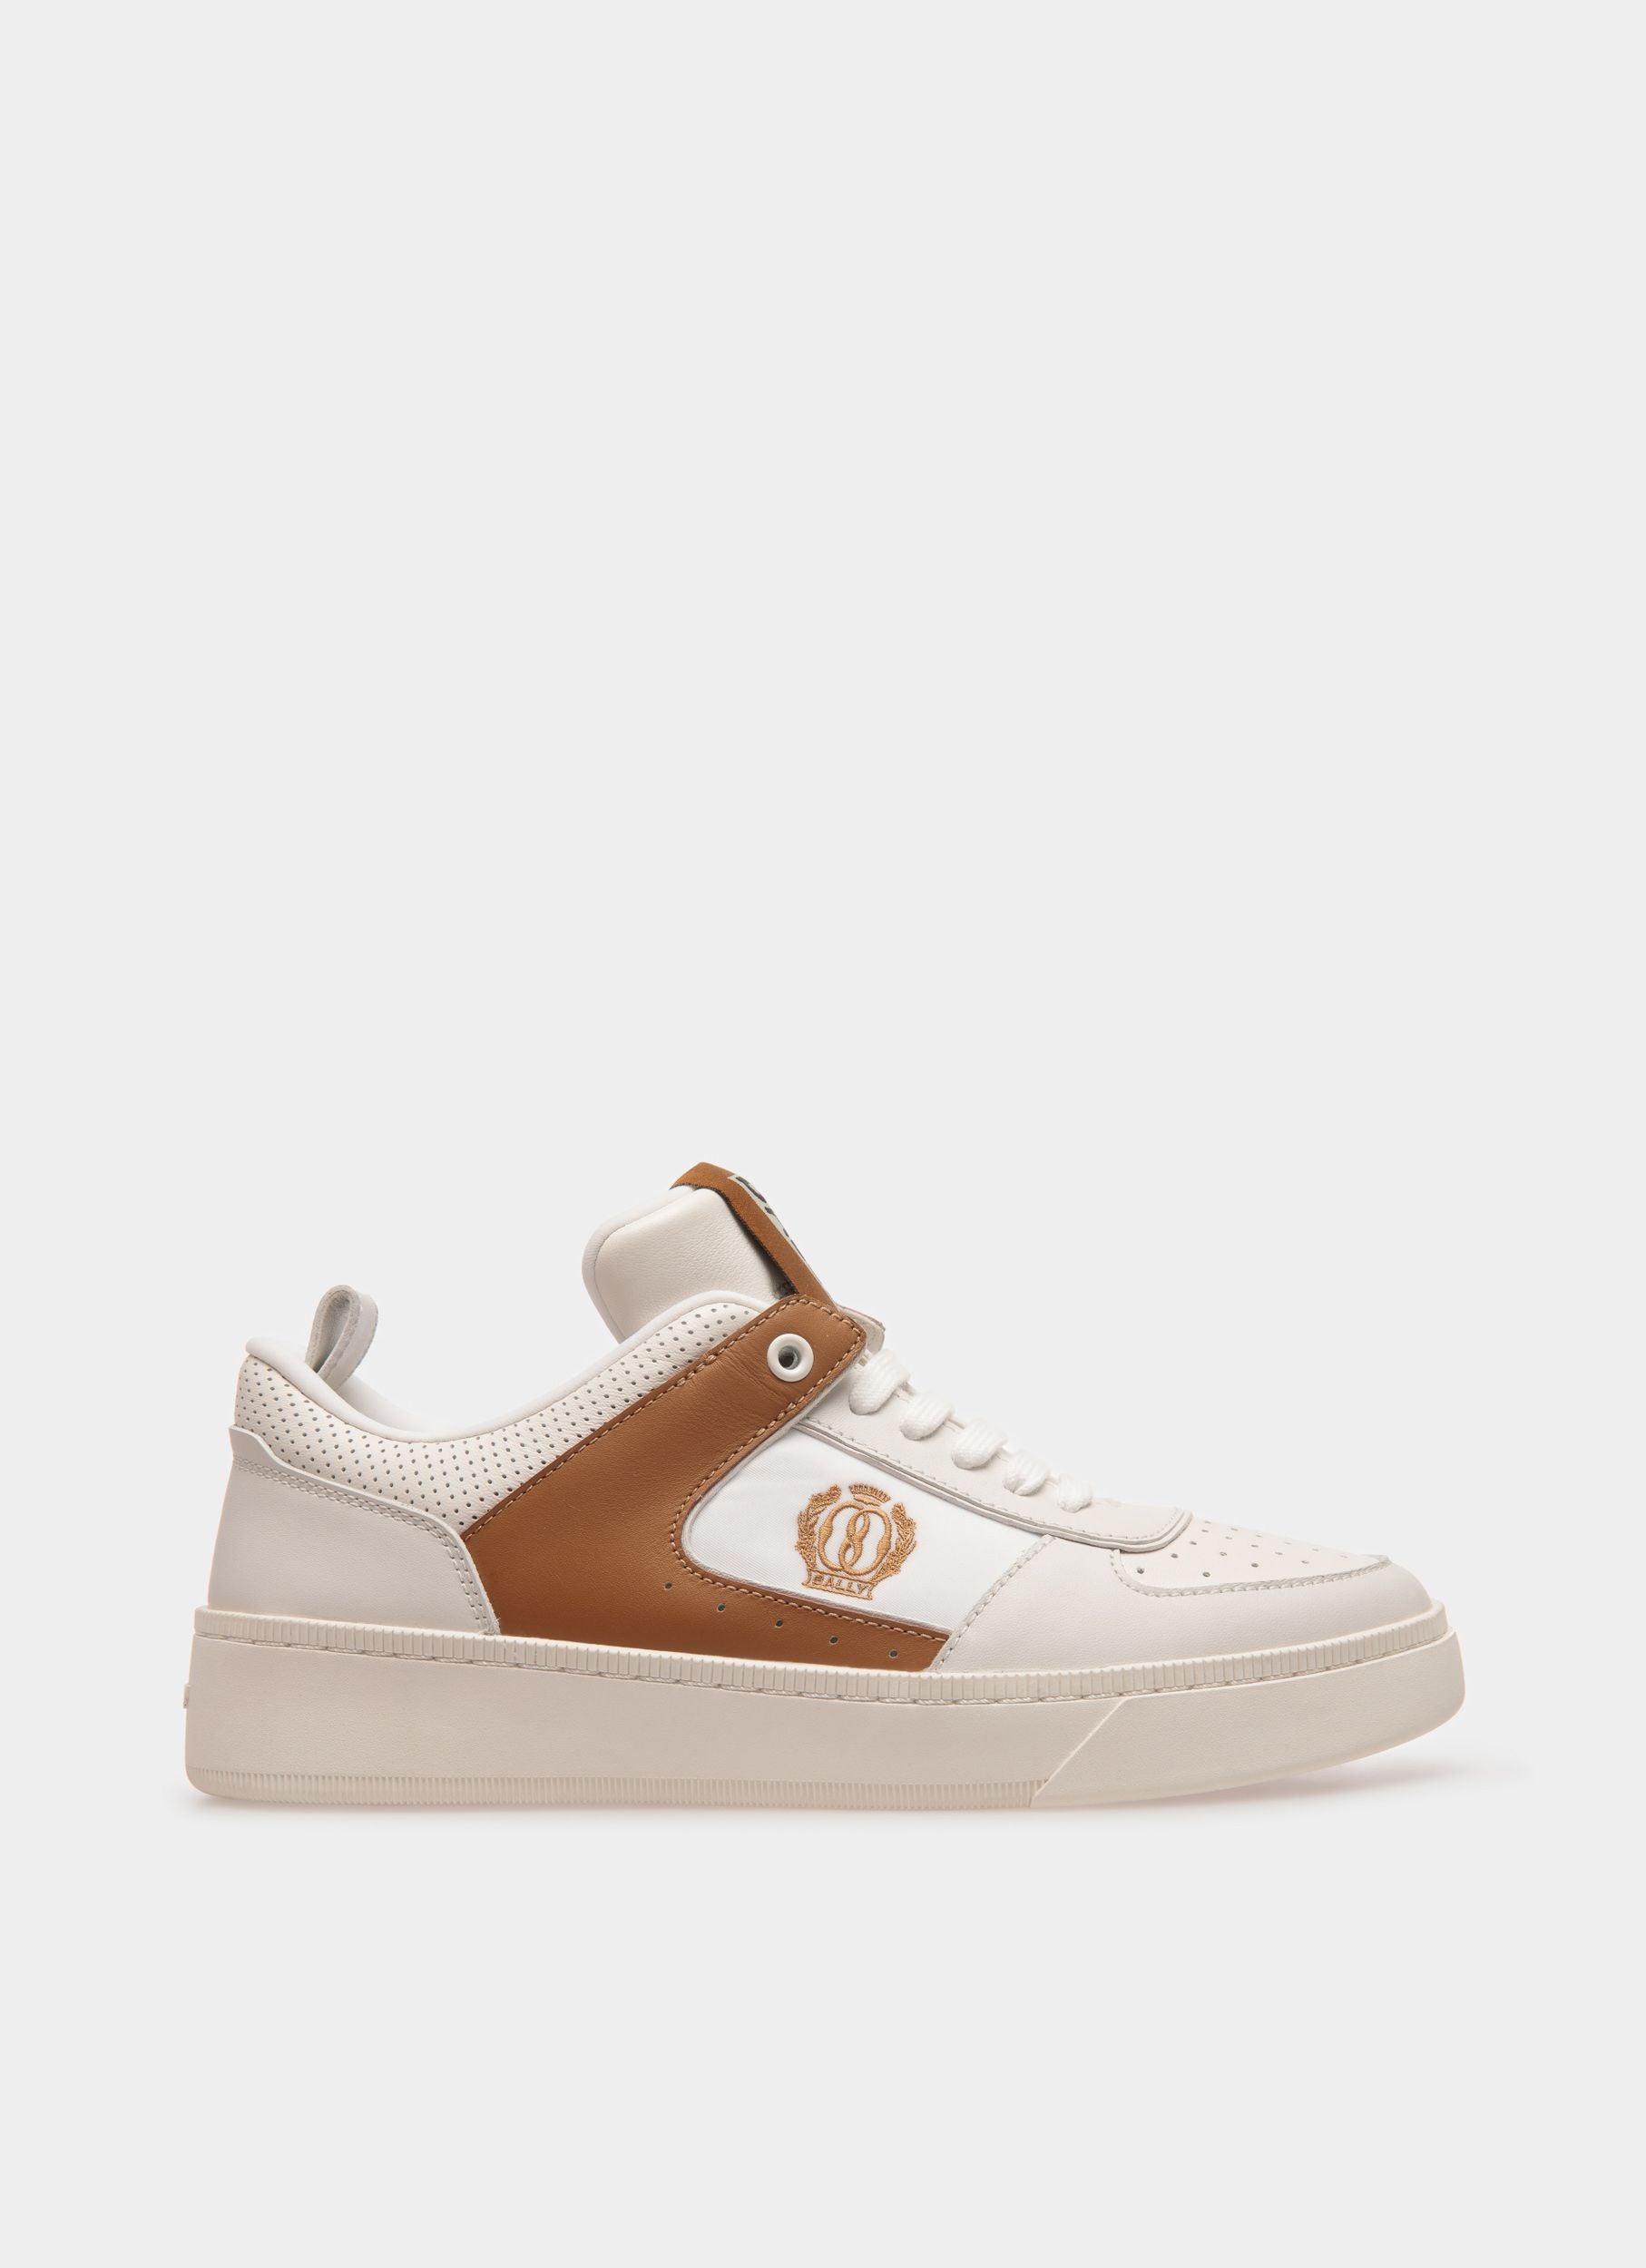 Sneakers | Women's Shoes | White and Brown Leather | Bally | Still Life Side